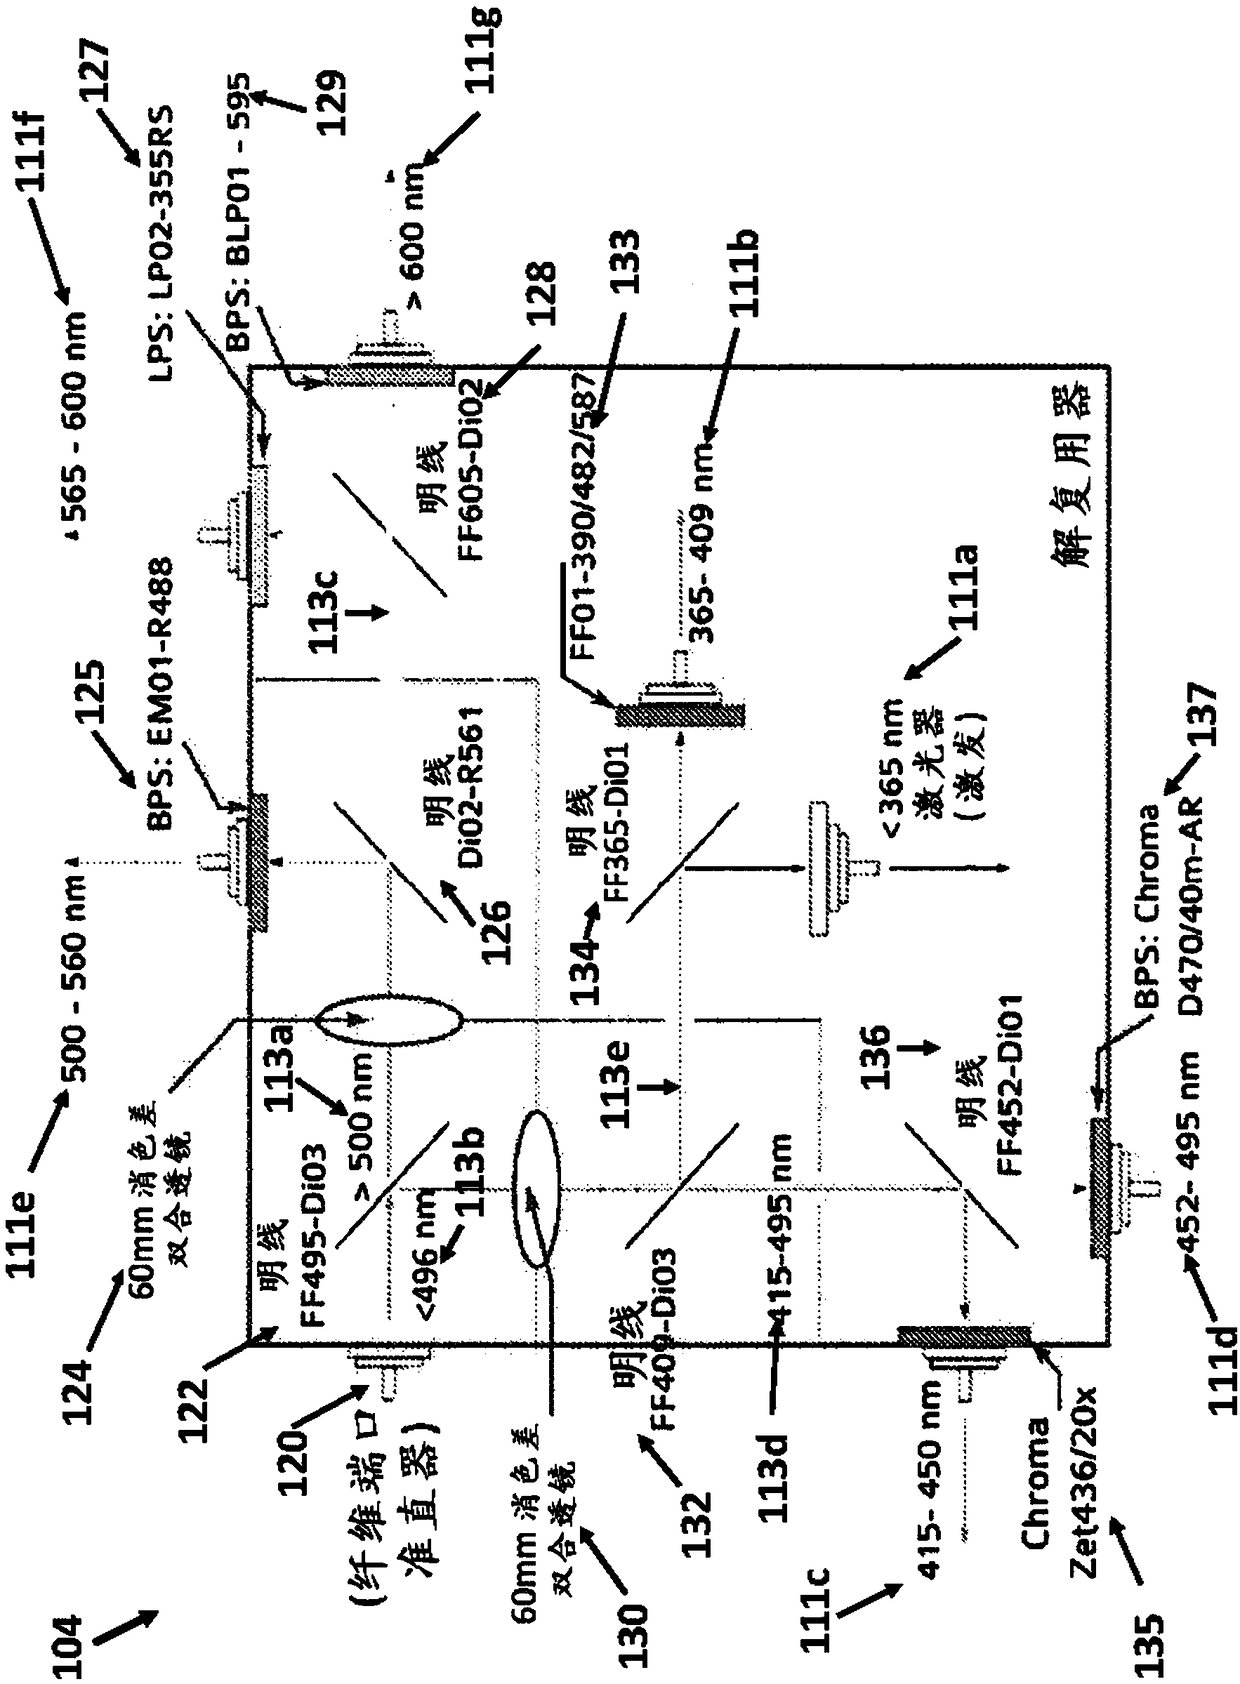 Systems, devices, and methods for time-resolved fluorescent spectroscopy